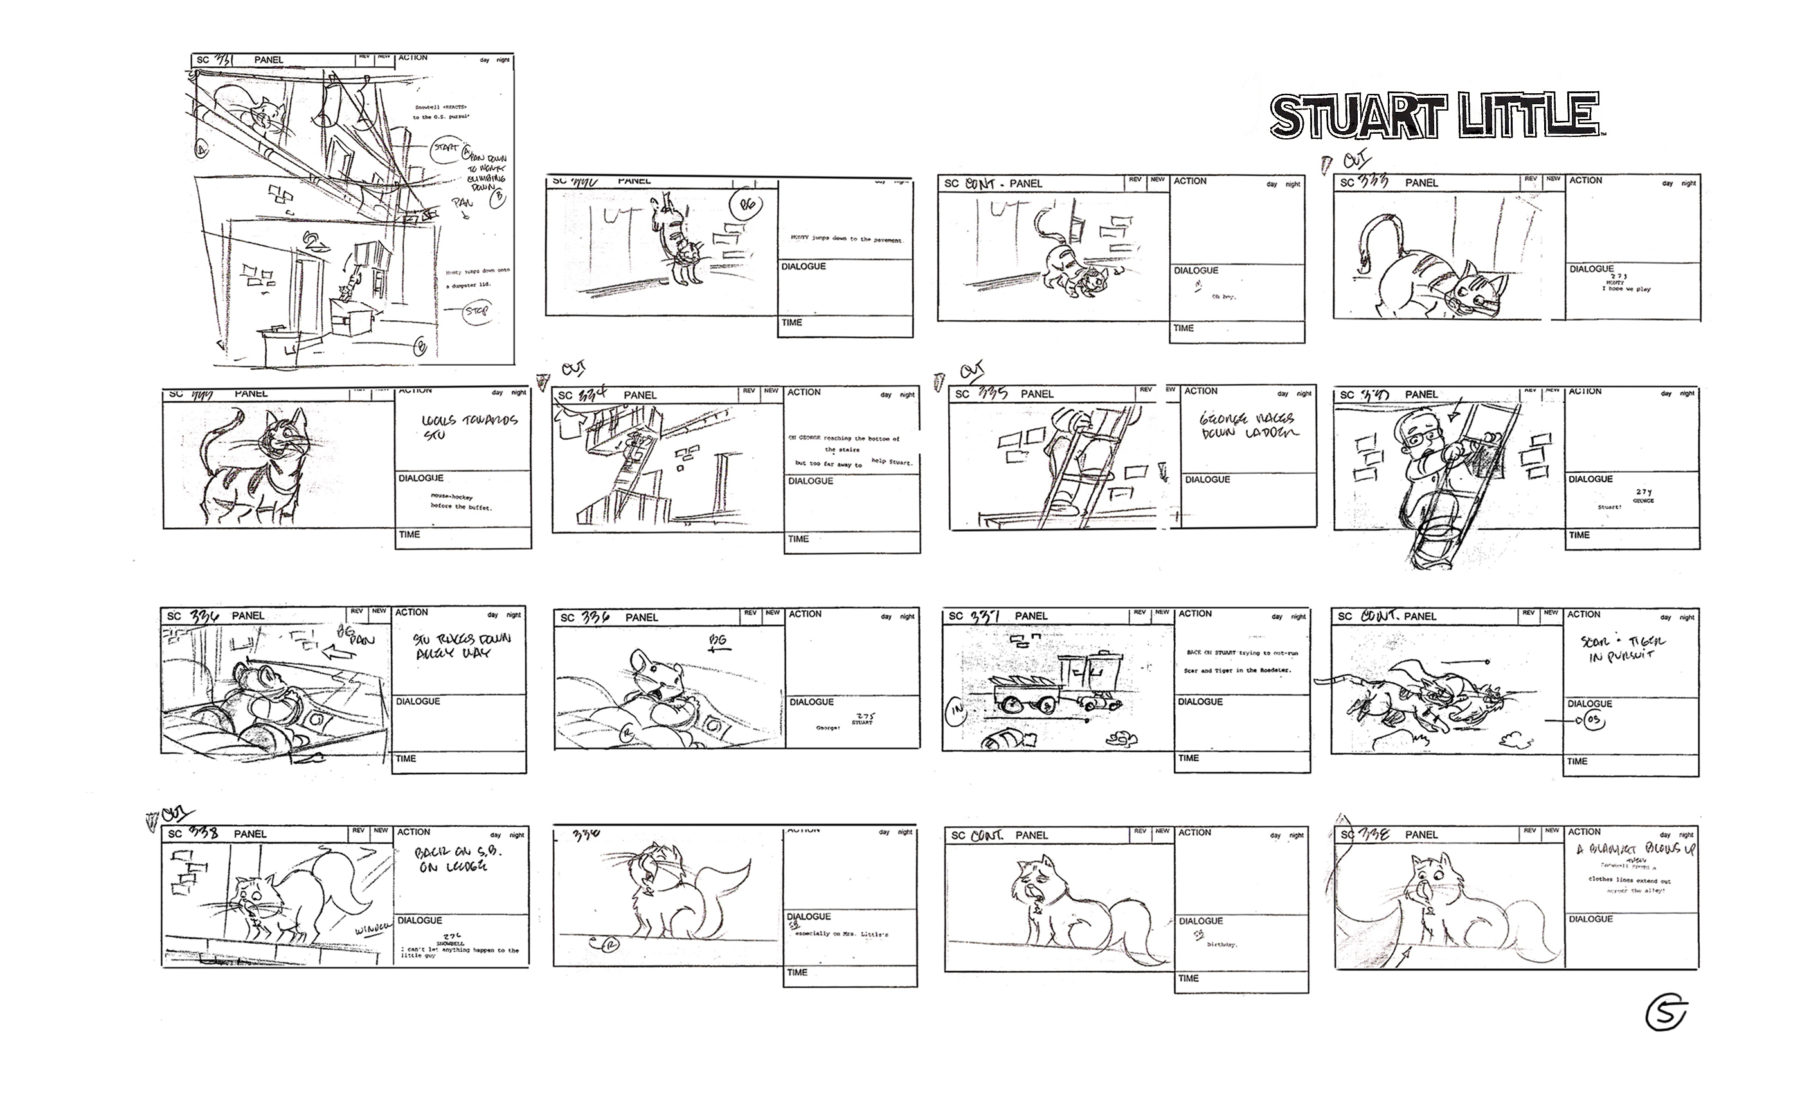 Storyboards by Bert Ring for the Stuart Little Animated Series, Universal Animation Studios